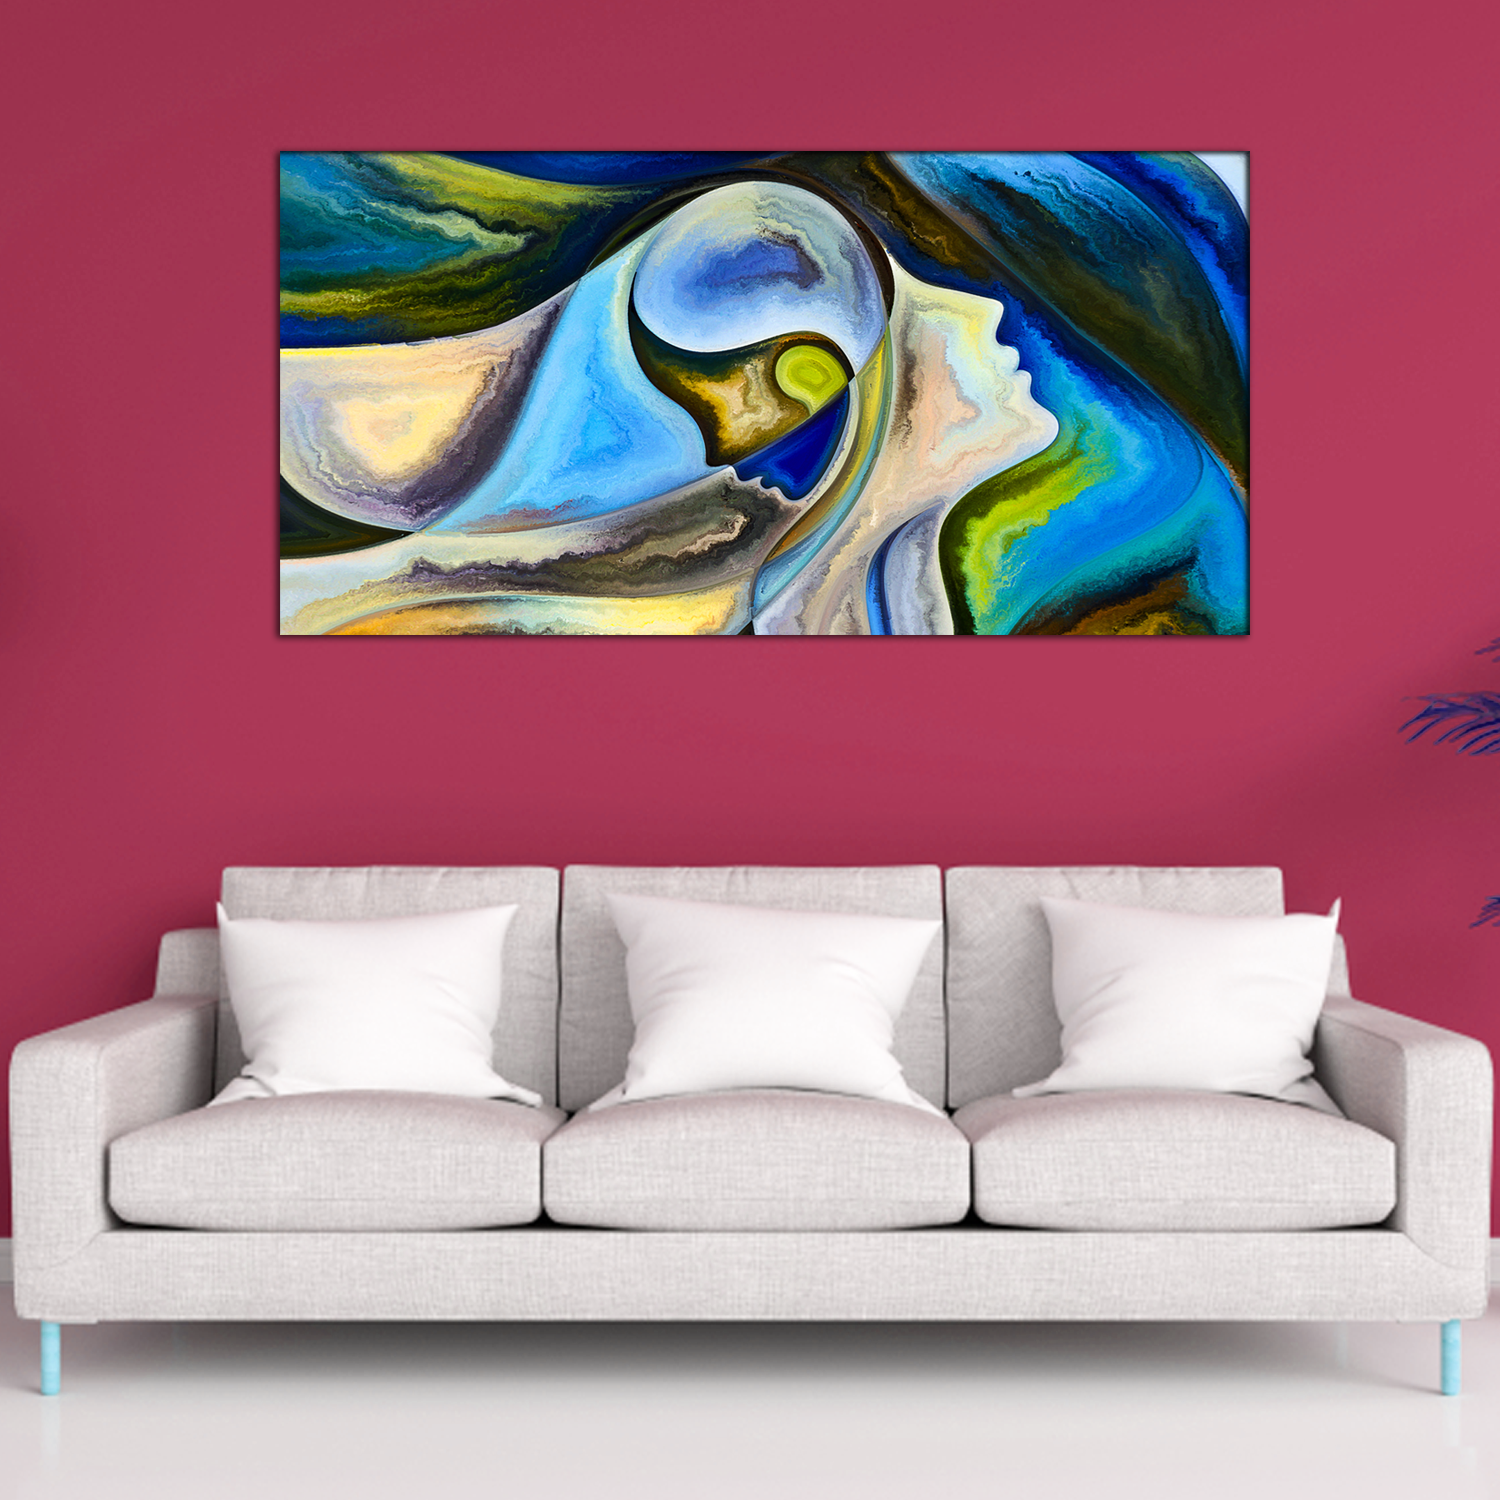 Mother and Child Relationship Abstract Canvas Print Wall Painting